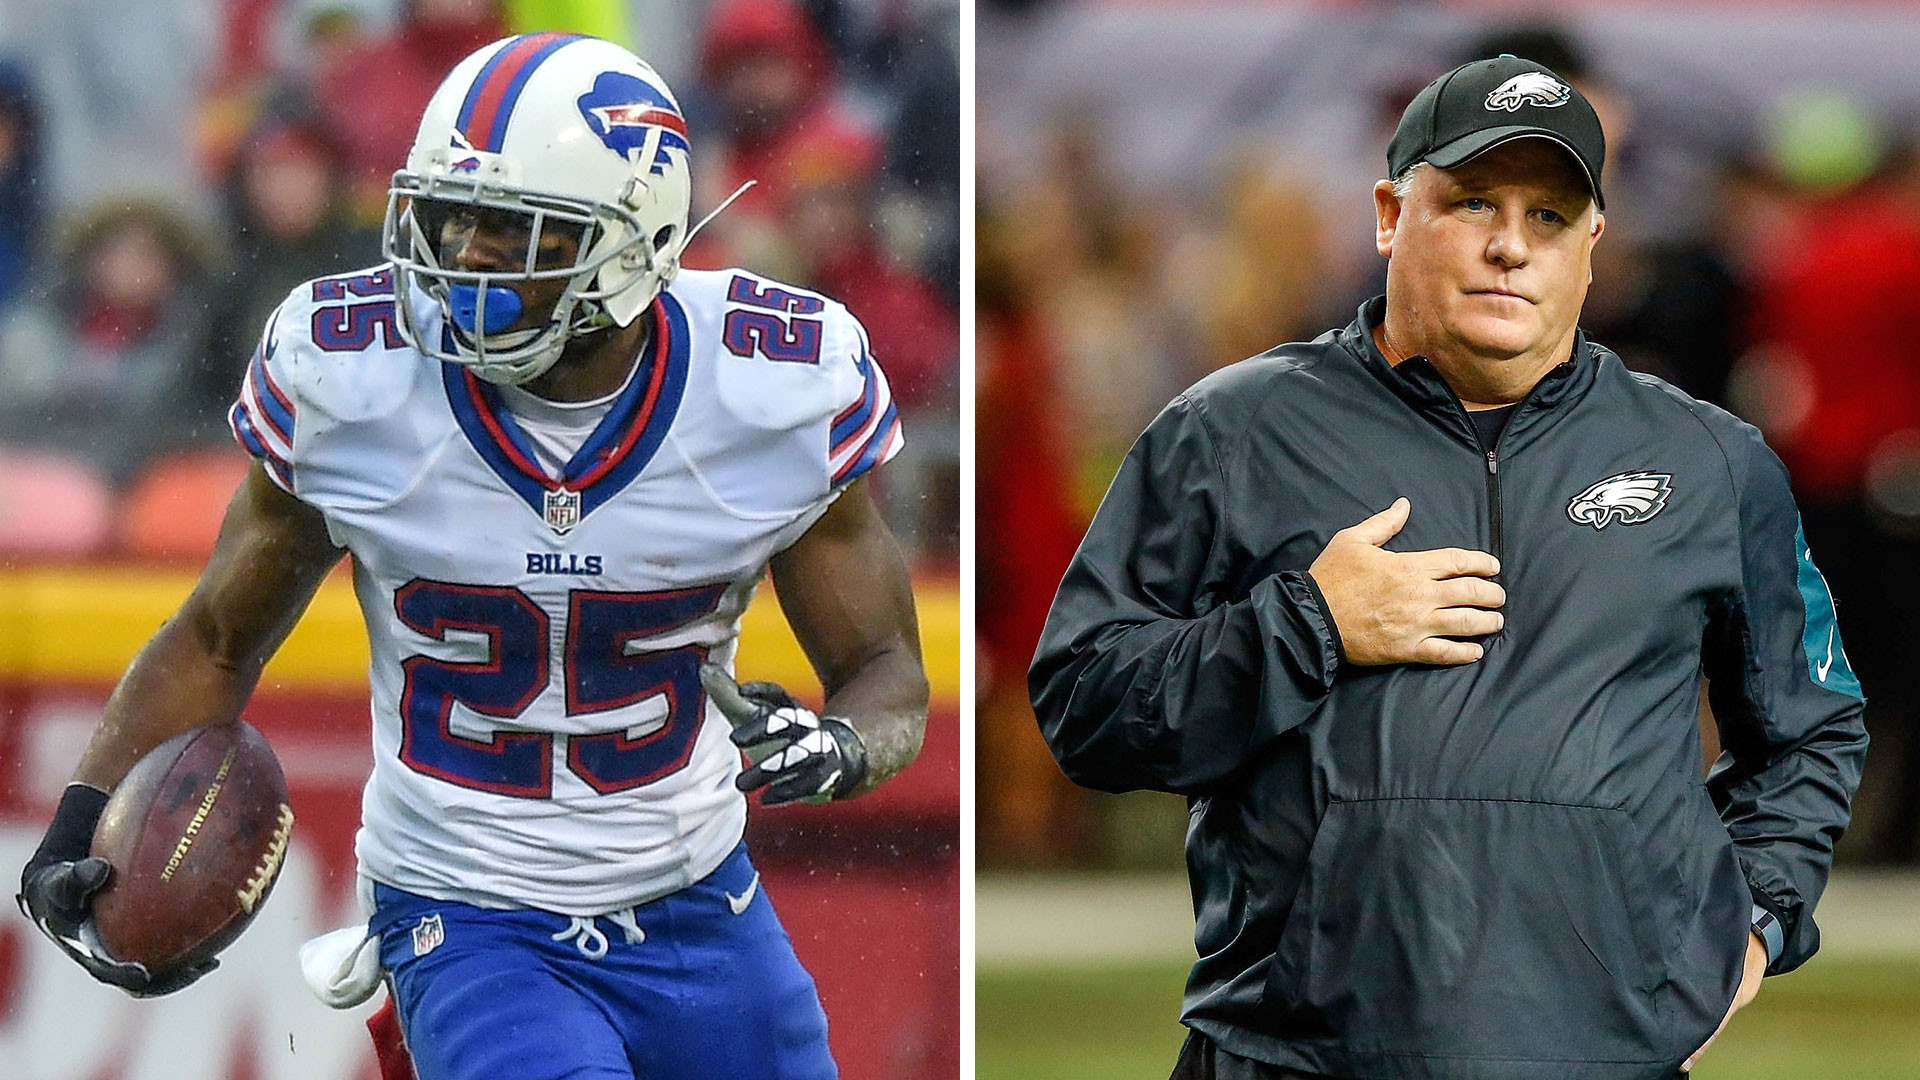 LeSean McCoy and Chip Kelly not enemies, but far from best friends | NFL |  Sporting News